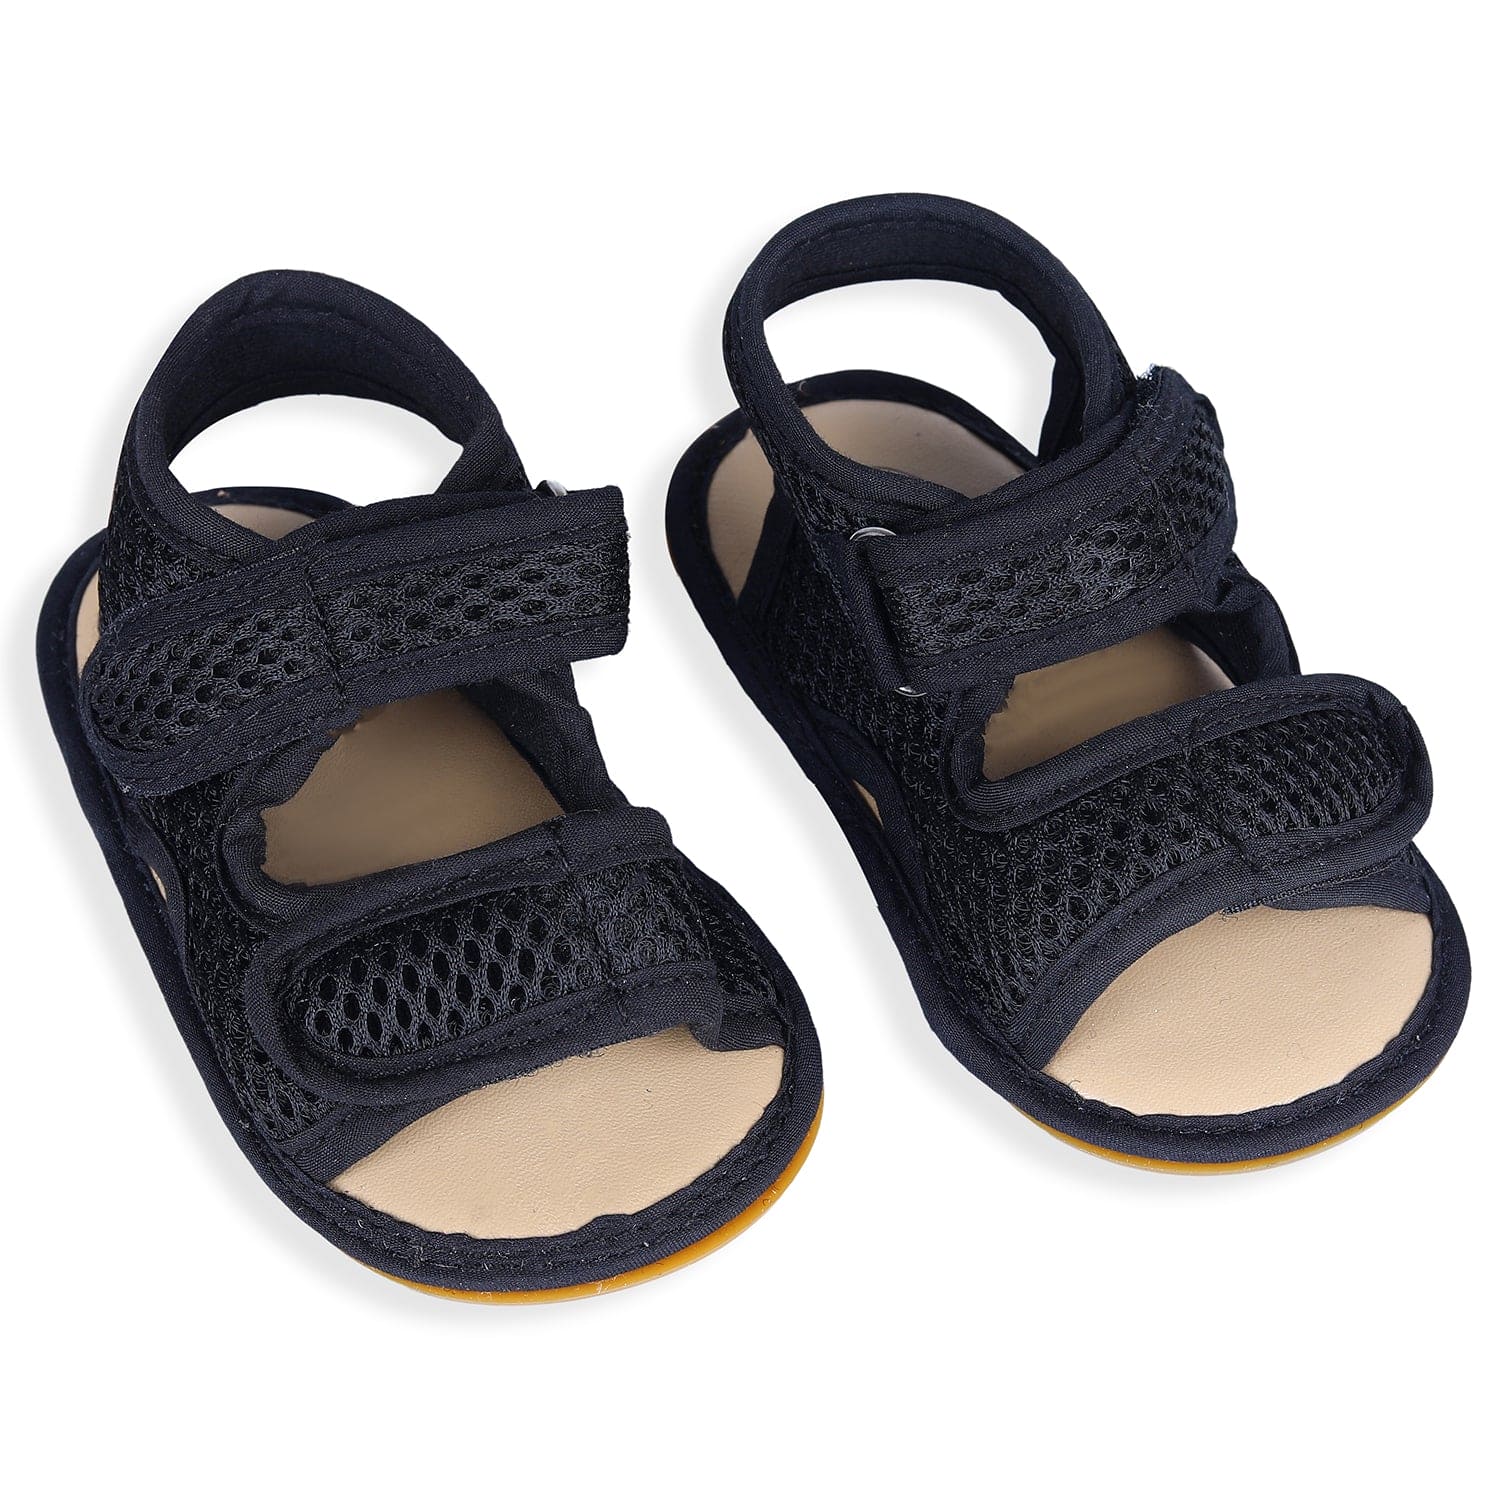 Summer Men Sandals Comfortable Non-slip Slippers Male Outdoor Beach Shoes  New | eBay